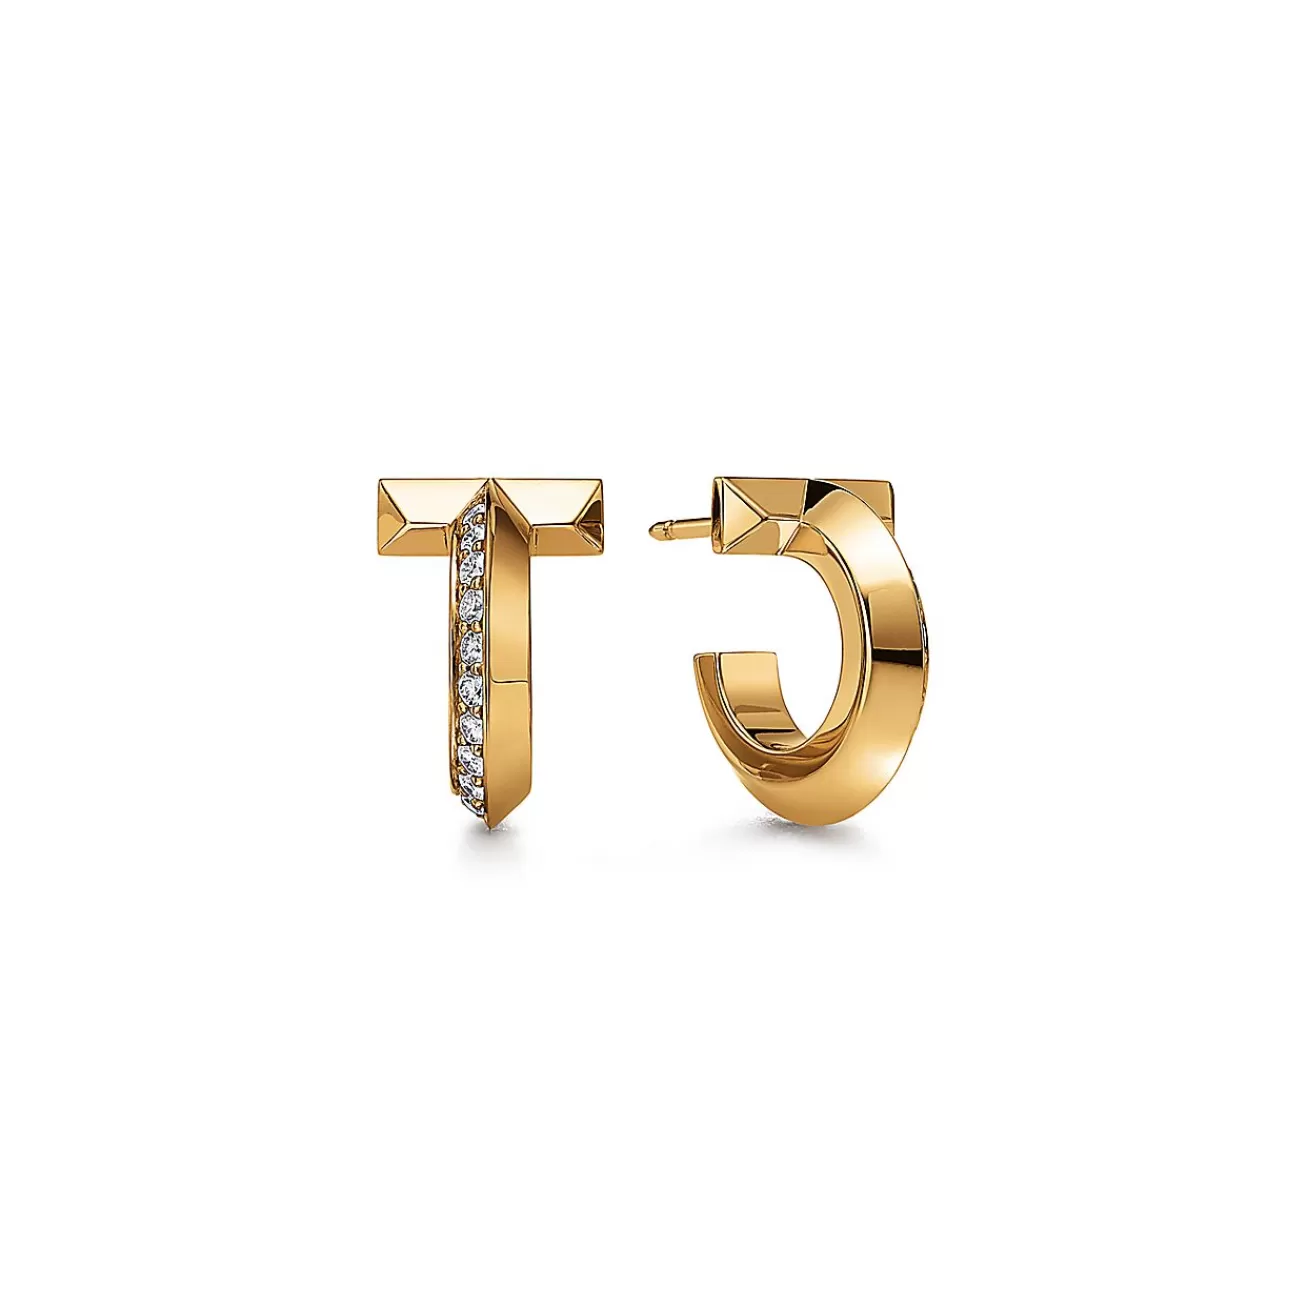 Tiffany & Co. Tiffany T T1 Hoop Earrings in Yellow Gold with Diamonds | ^ Earrings | Gifts for Her